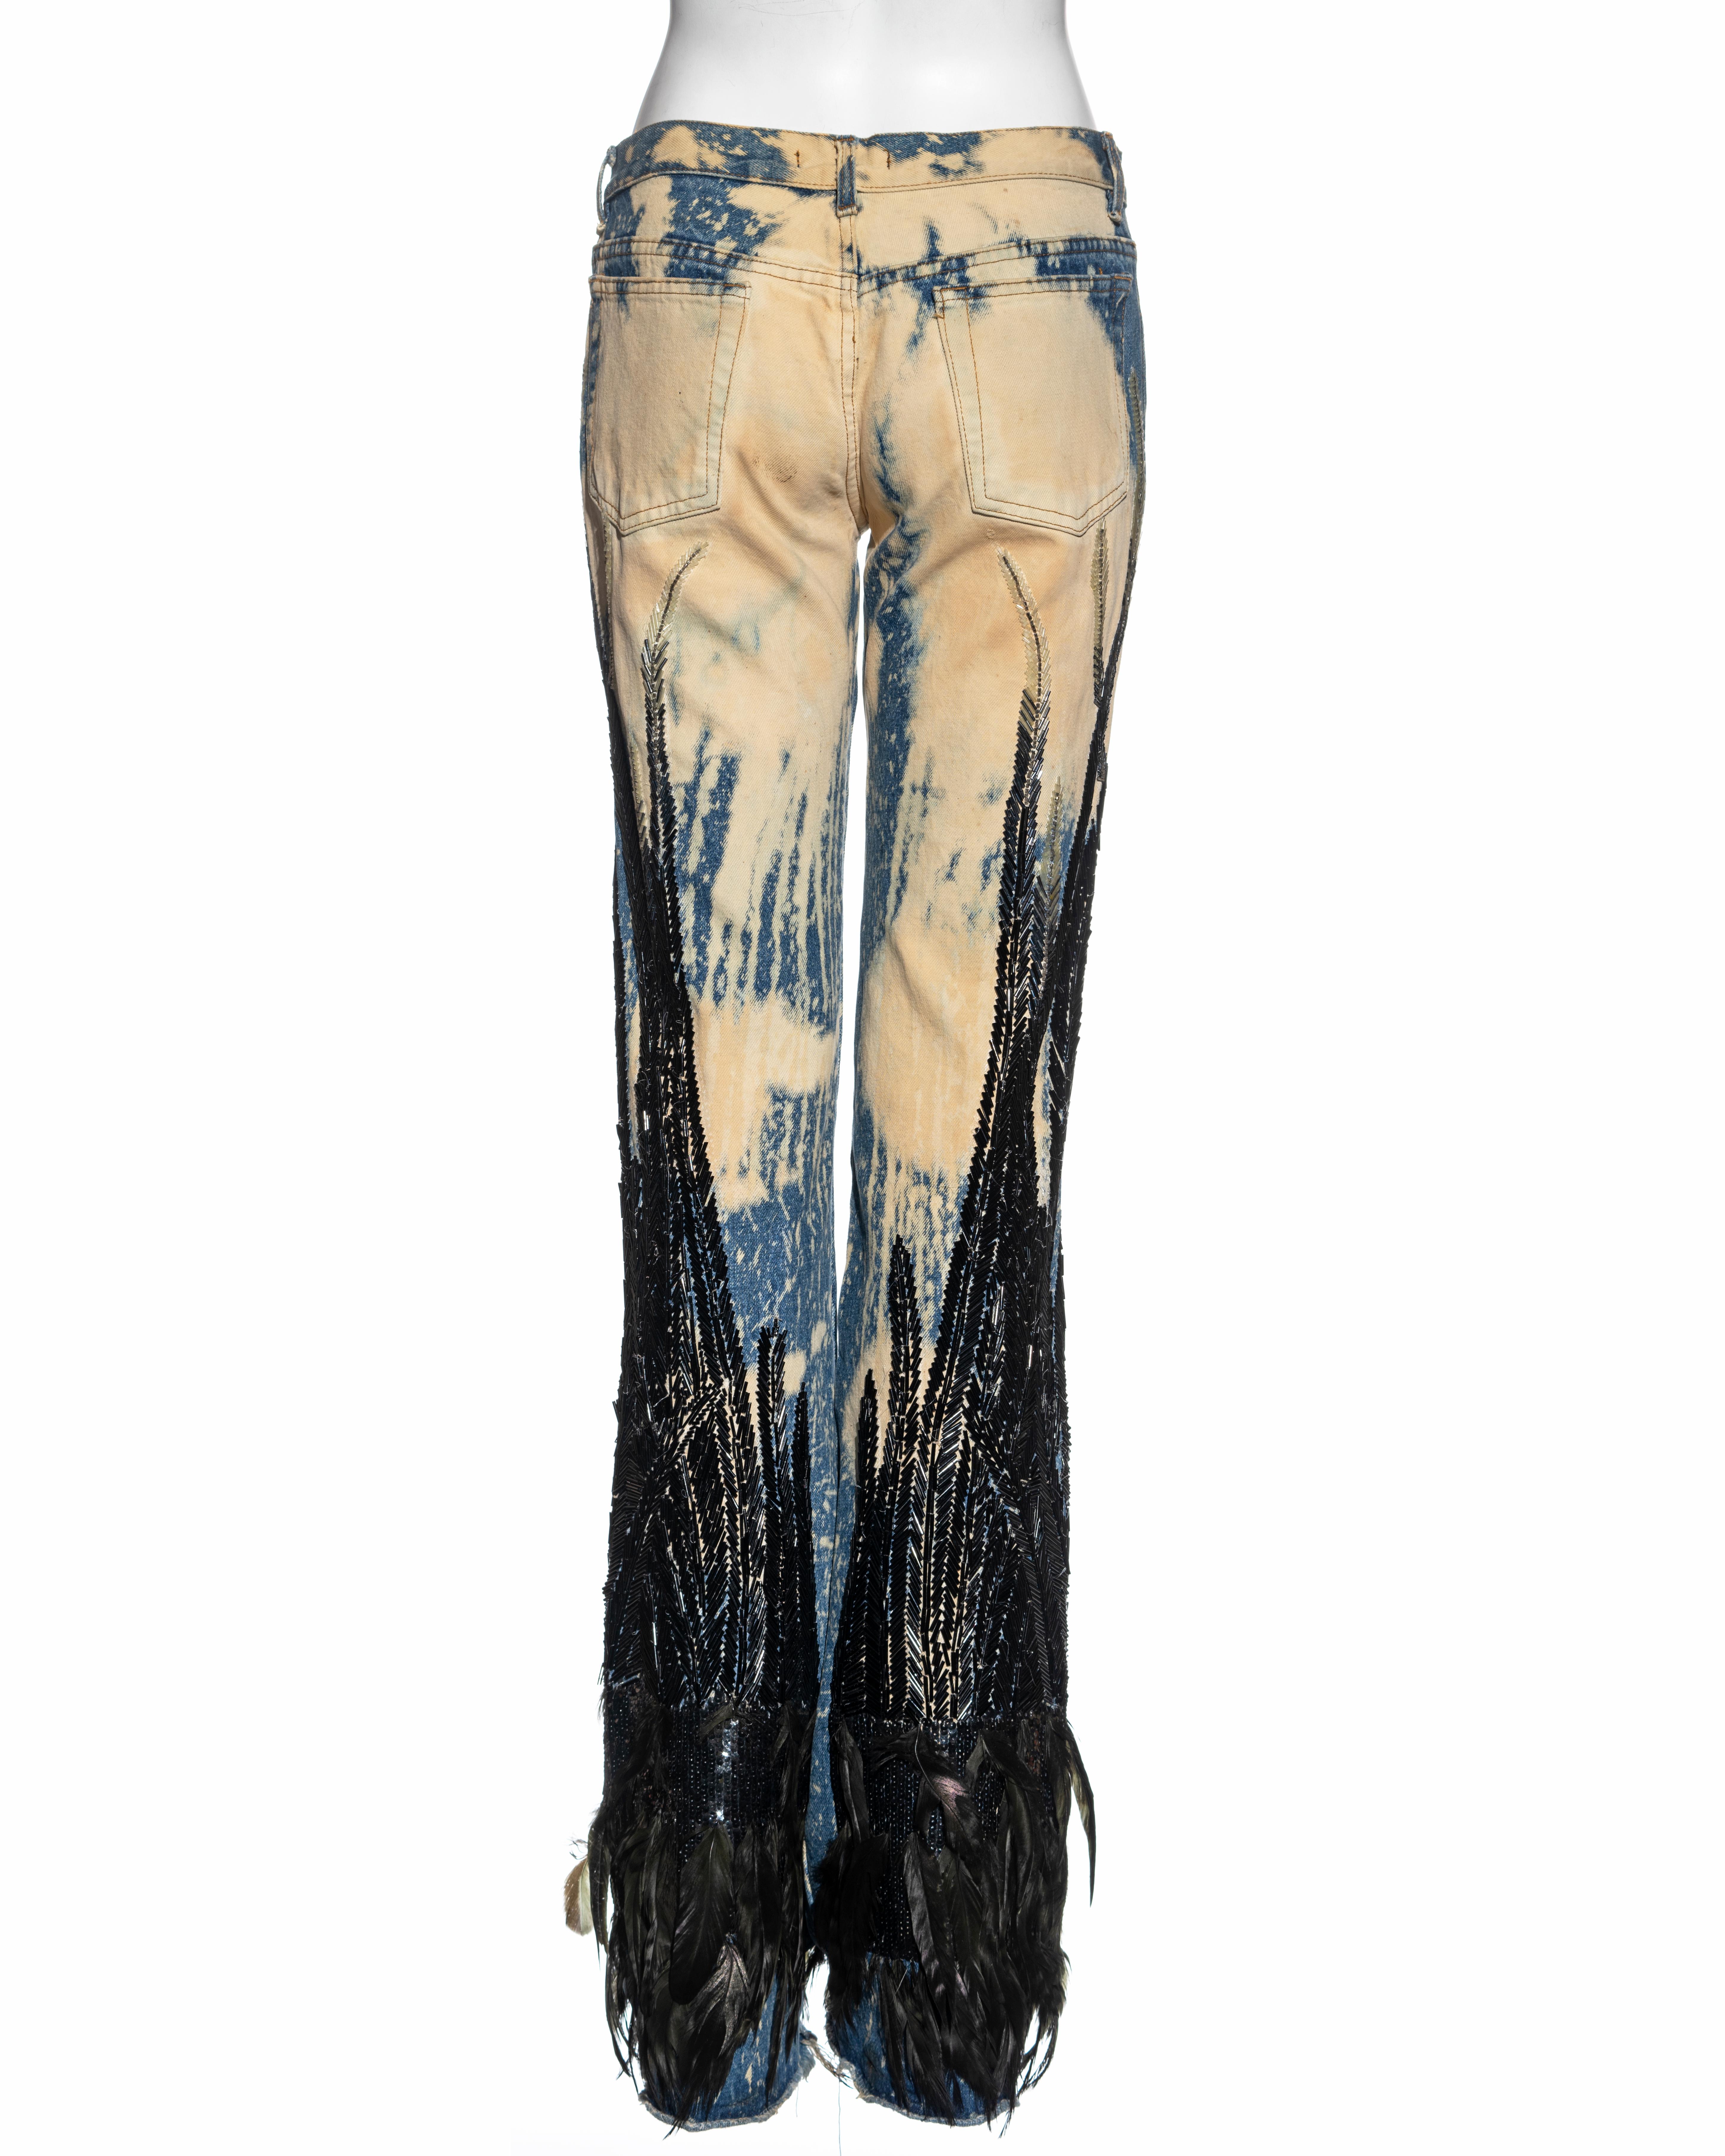 ▪ Roberto Cavalli runway jeans 
▪ Bleached denim 
▪ Black bugle beads and sequins
▪ Feather embellishments at the hem 
▪ Straight leg 
▪ Size Small
▪ Fall-Winter 2001
▪ 100% Cotton
▪ Made in Italy